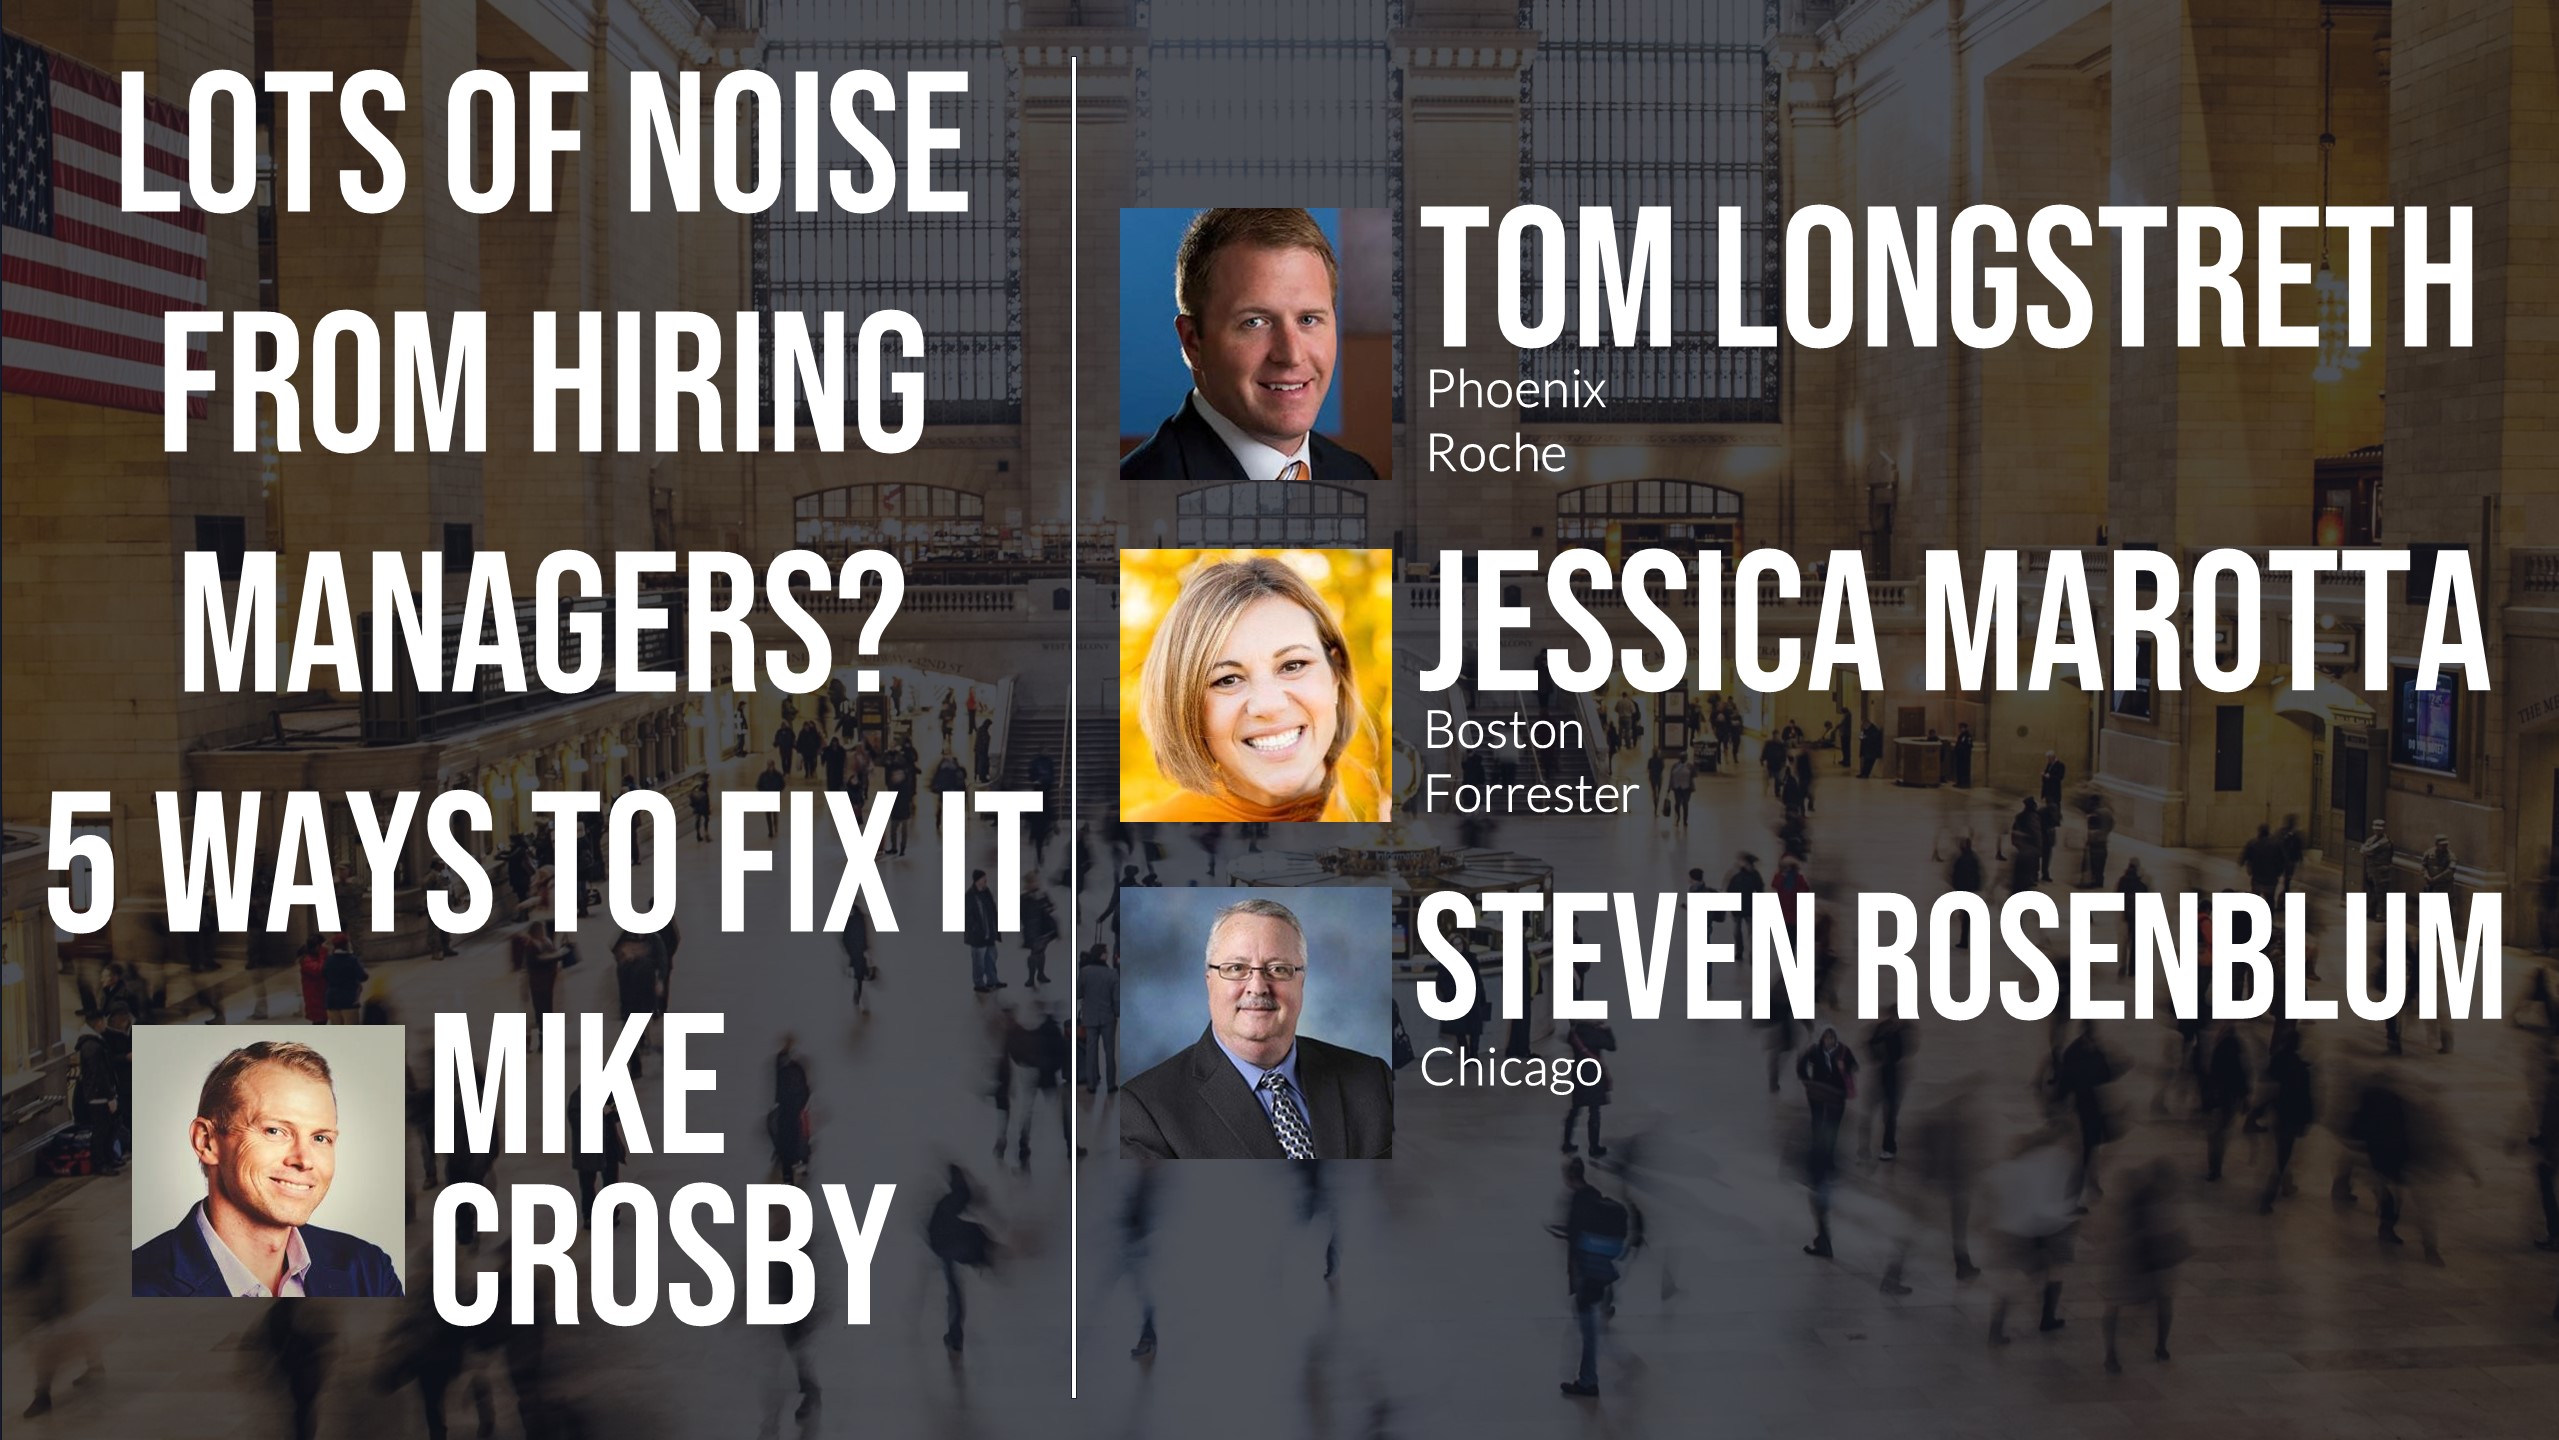 Lots of Noise from Hiring Managers - 5 Ways to Fix It